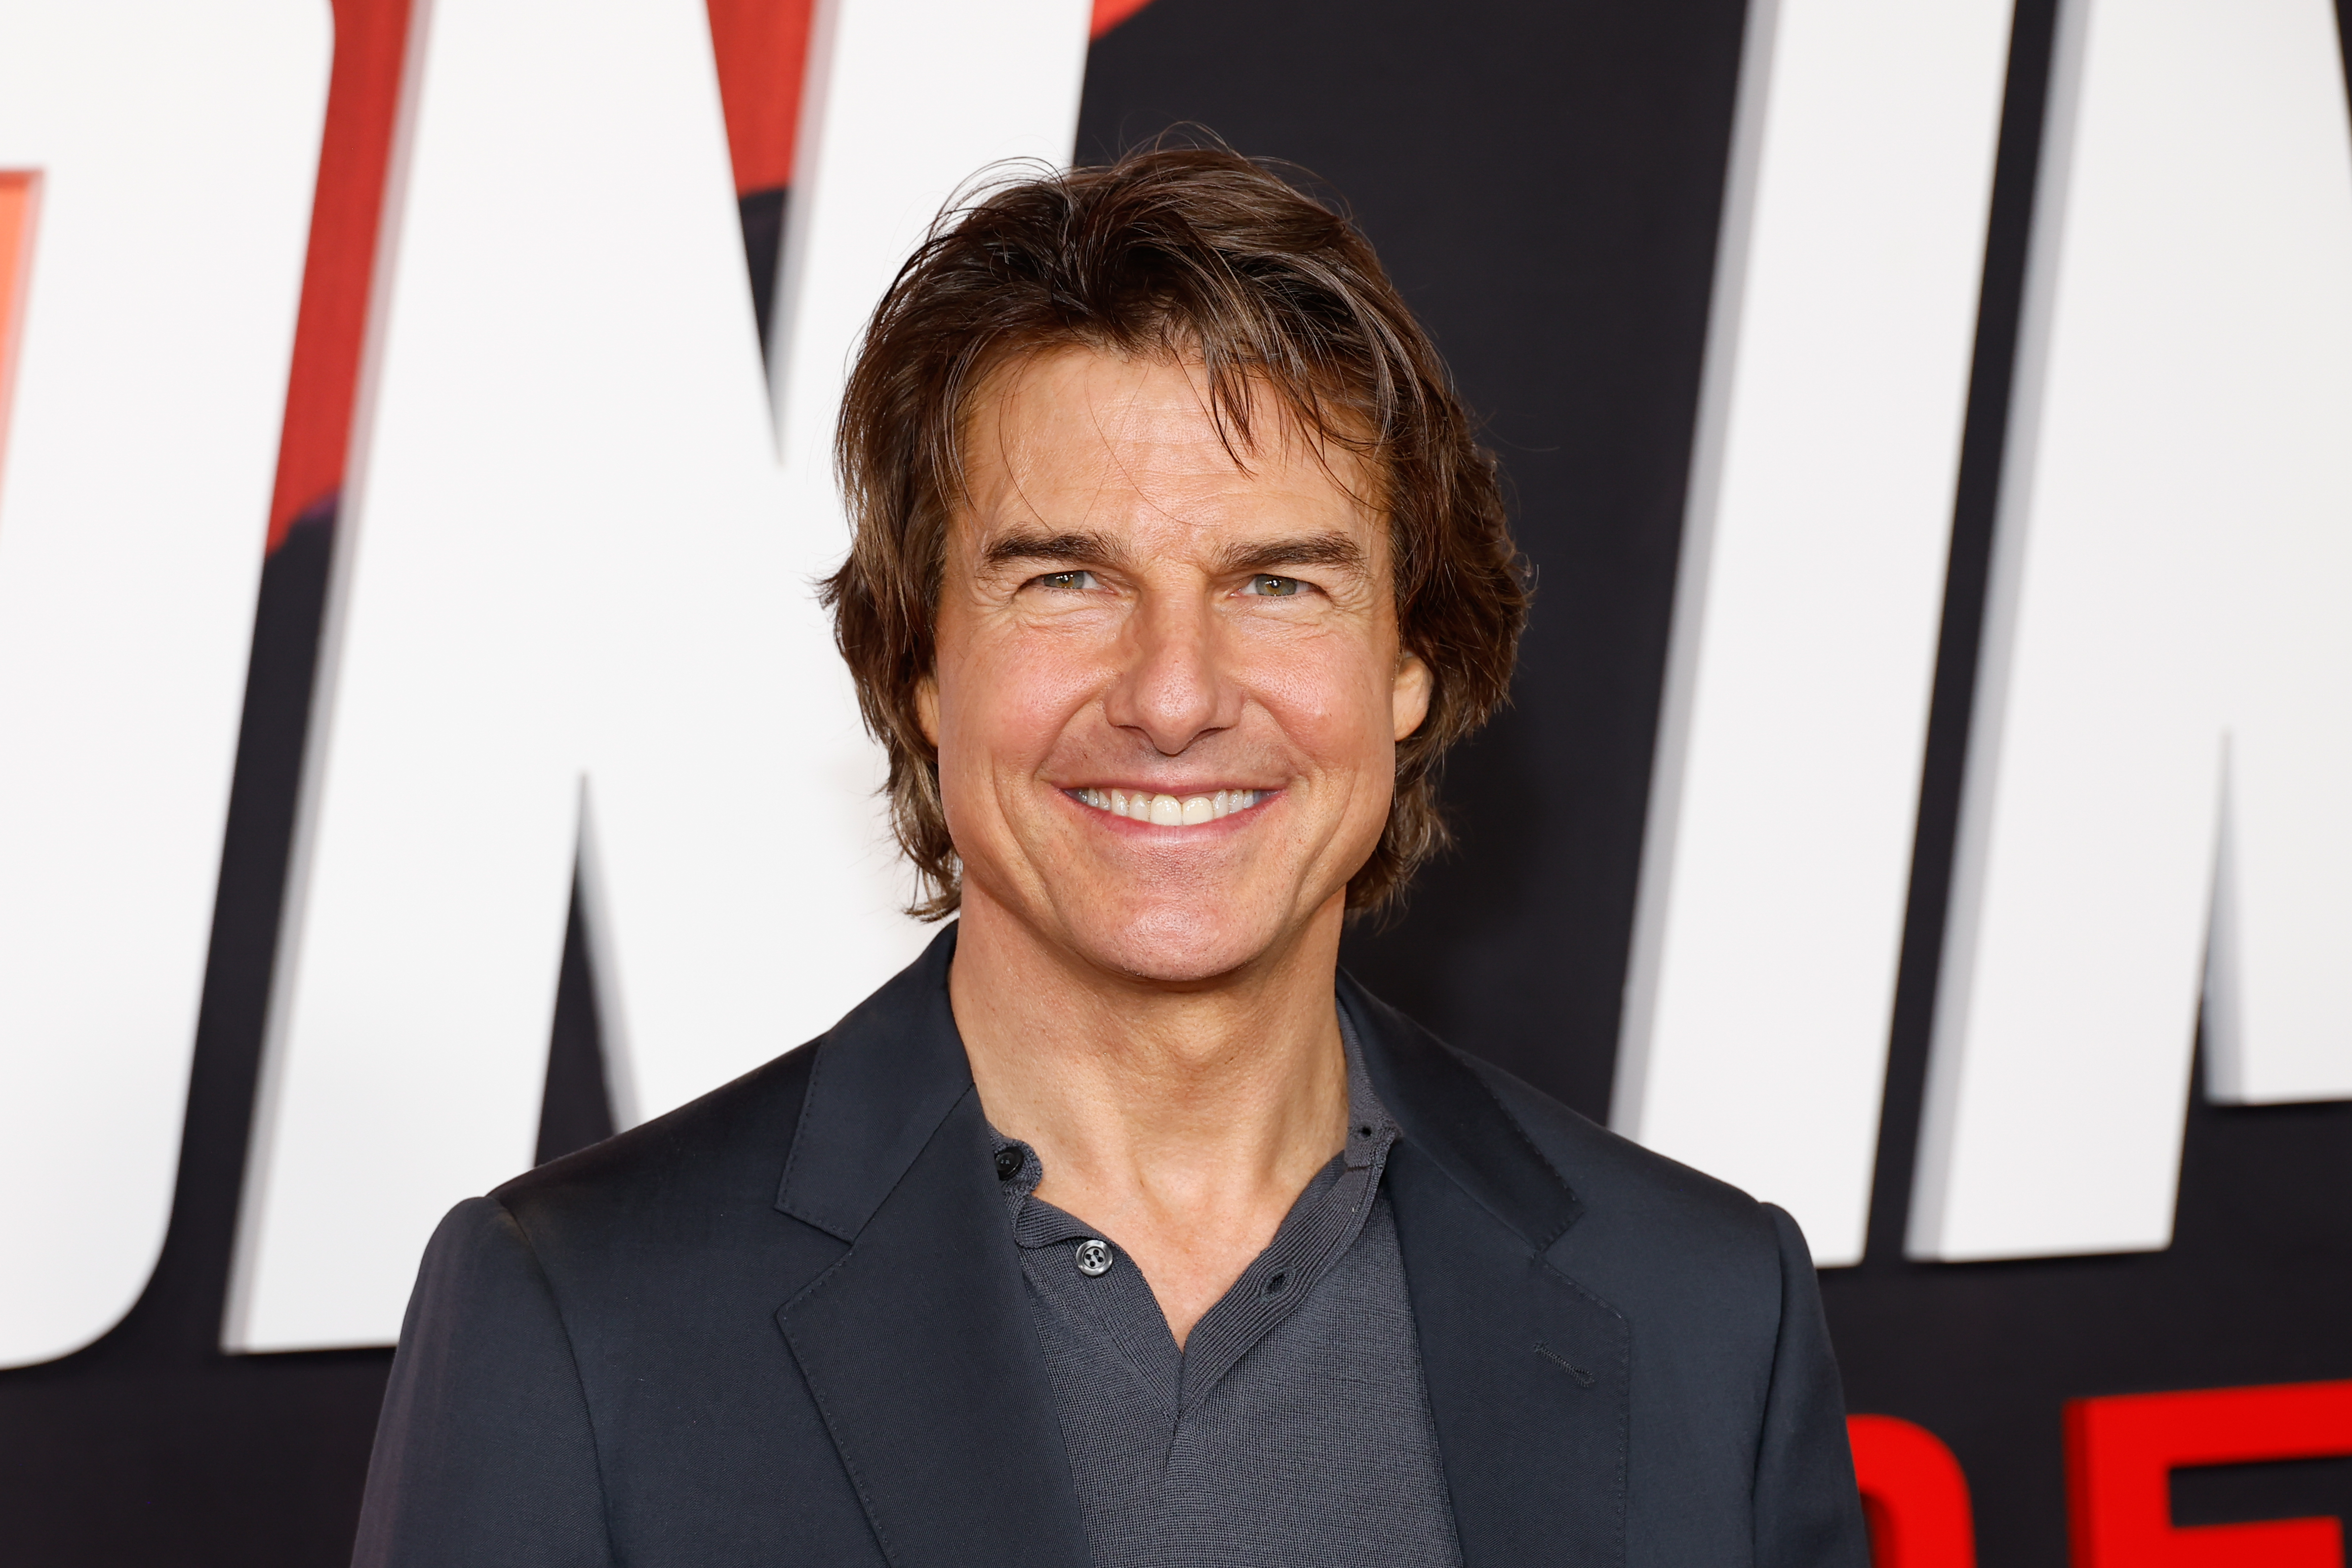 Tom Cruise attends the "Mission: Impossible - Dead Reckoning Part One" premiere on July 10, 2023 in New York City | Source: Getty Images